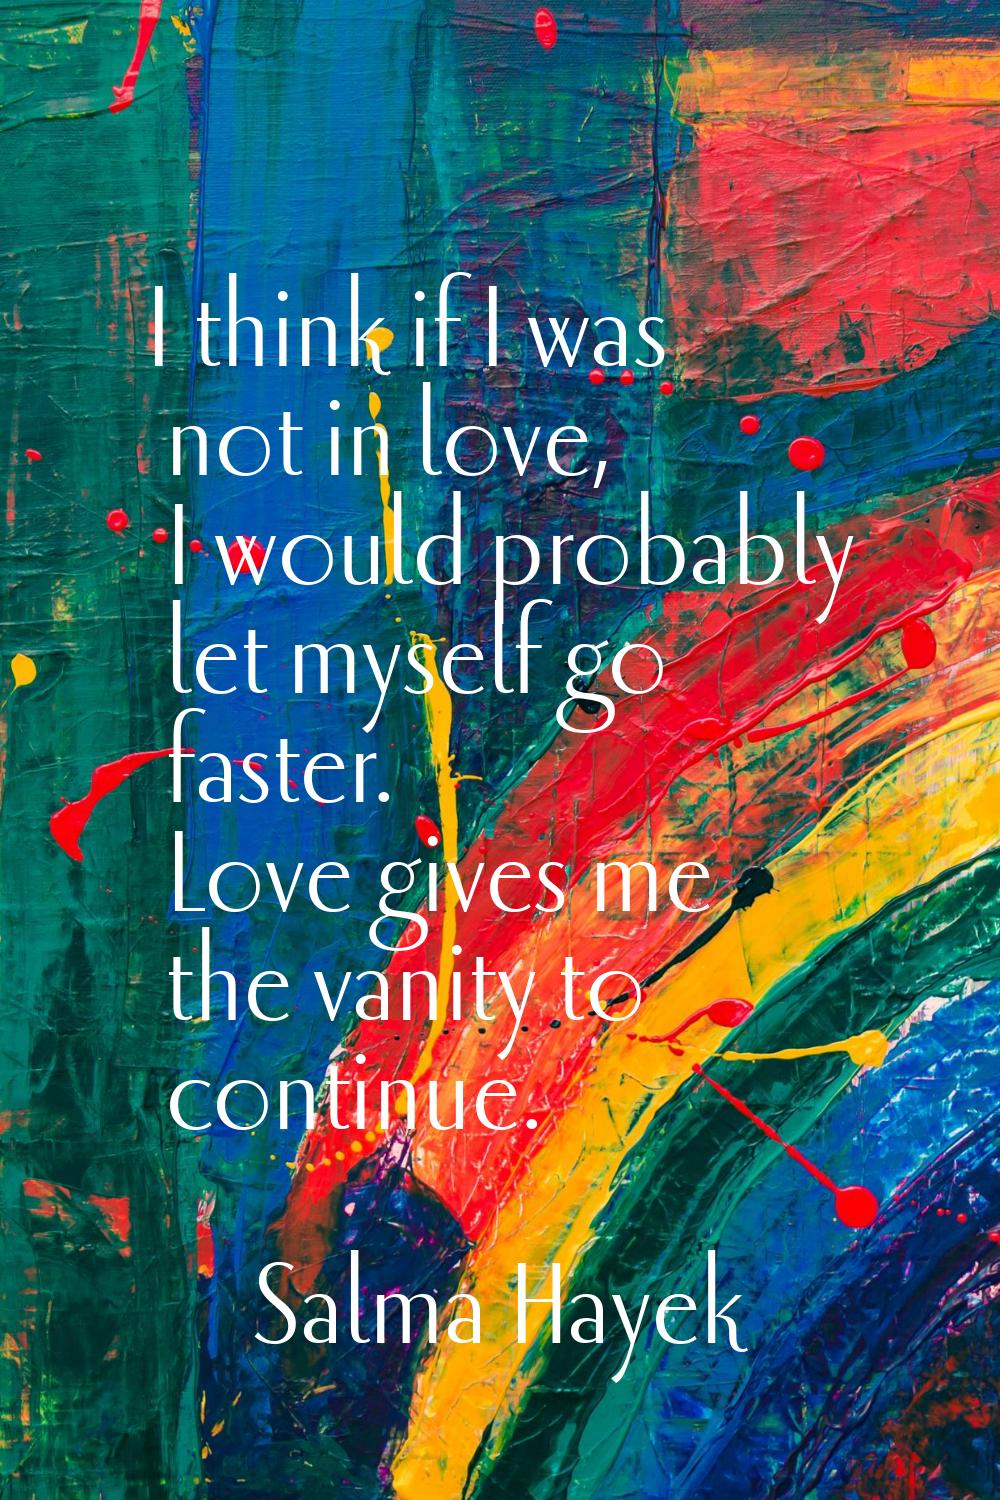 I think if I was not in love, I would probably let myself go faster. Love gives me the vanity to co